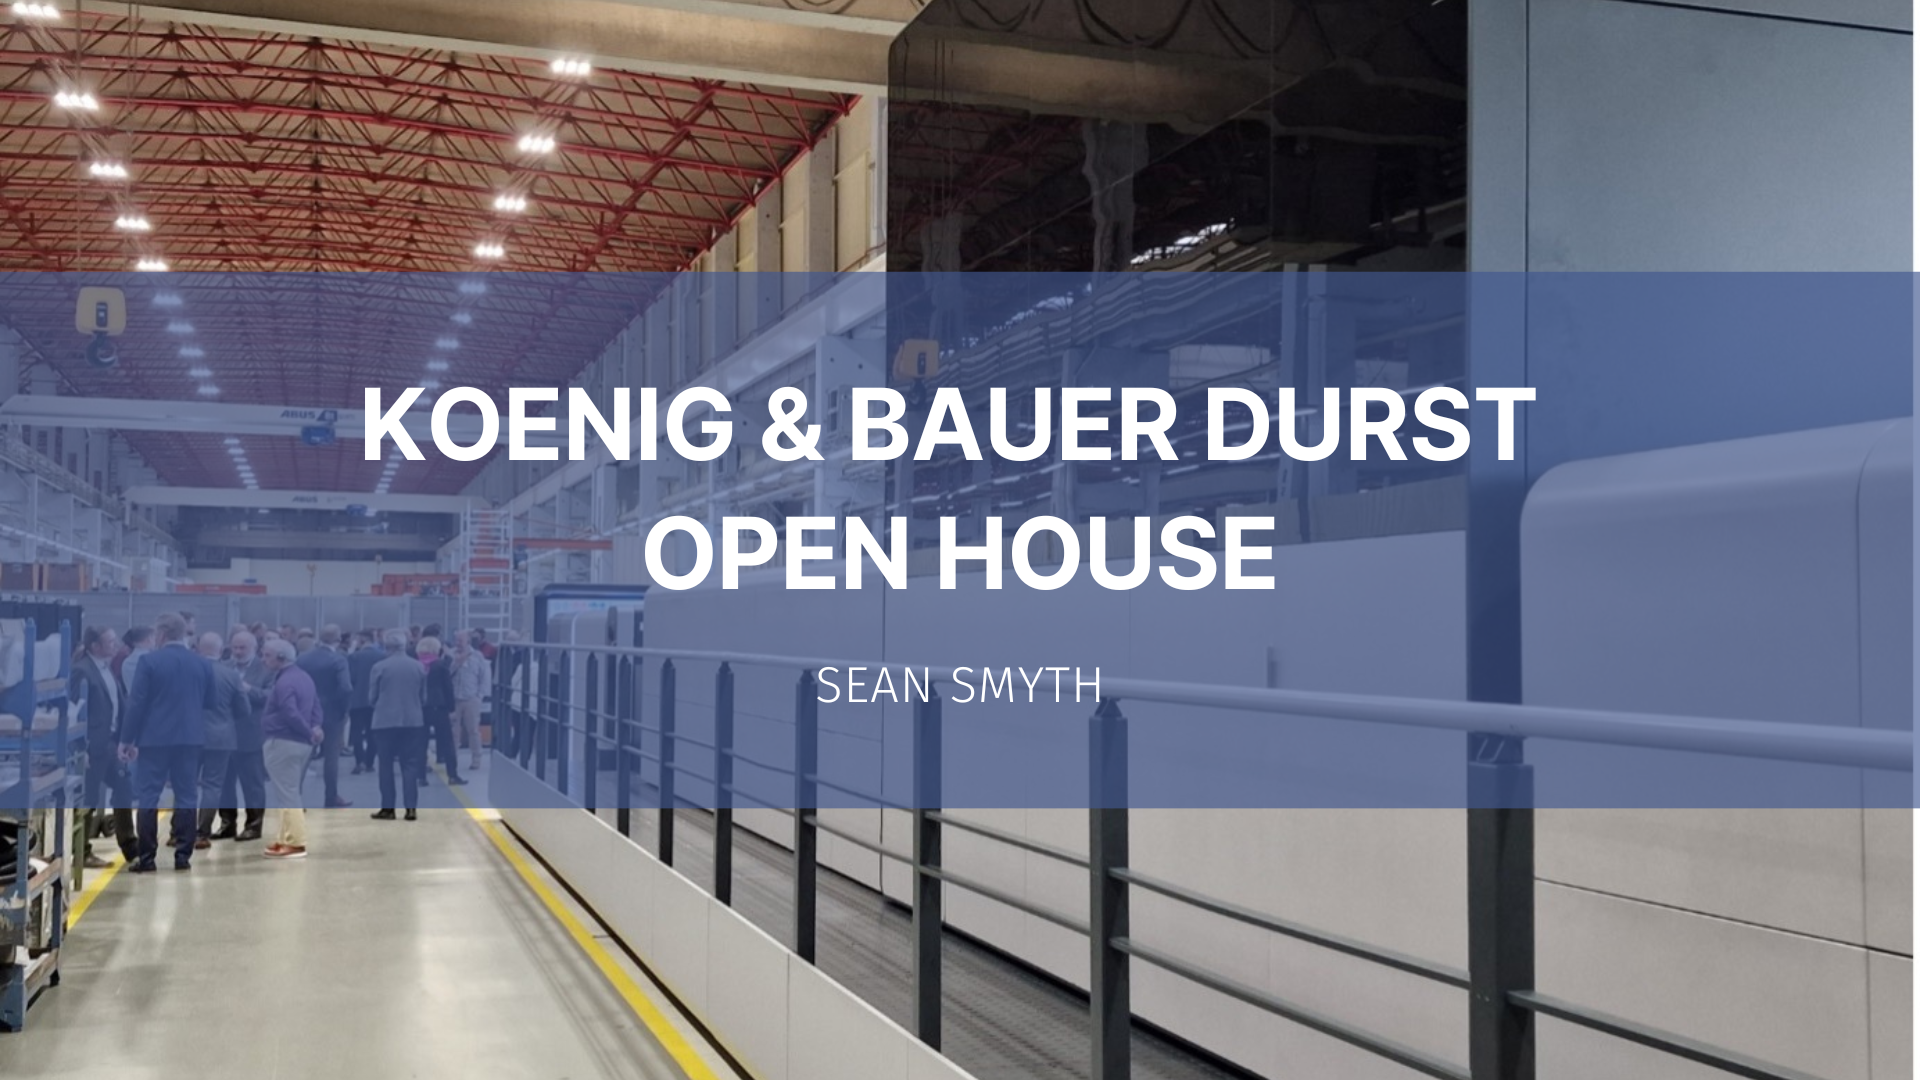 Featured image for “Koenig & Bauer Durst open house”